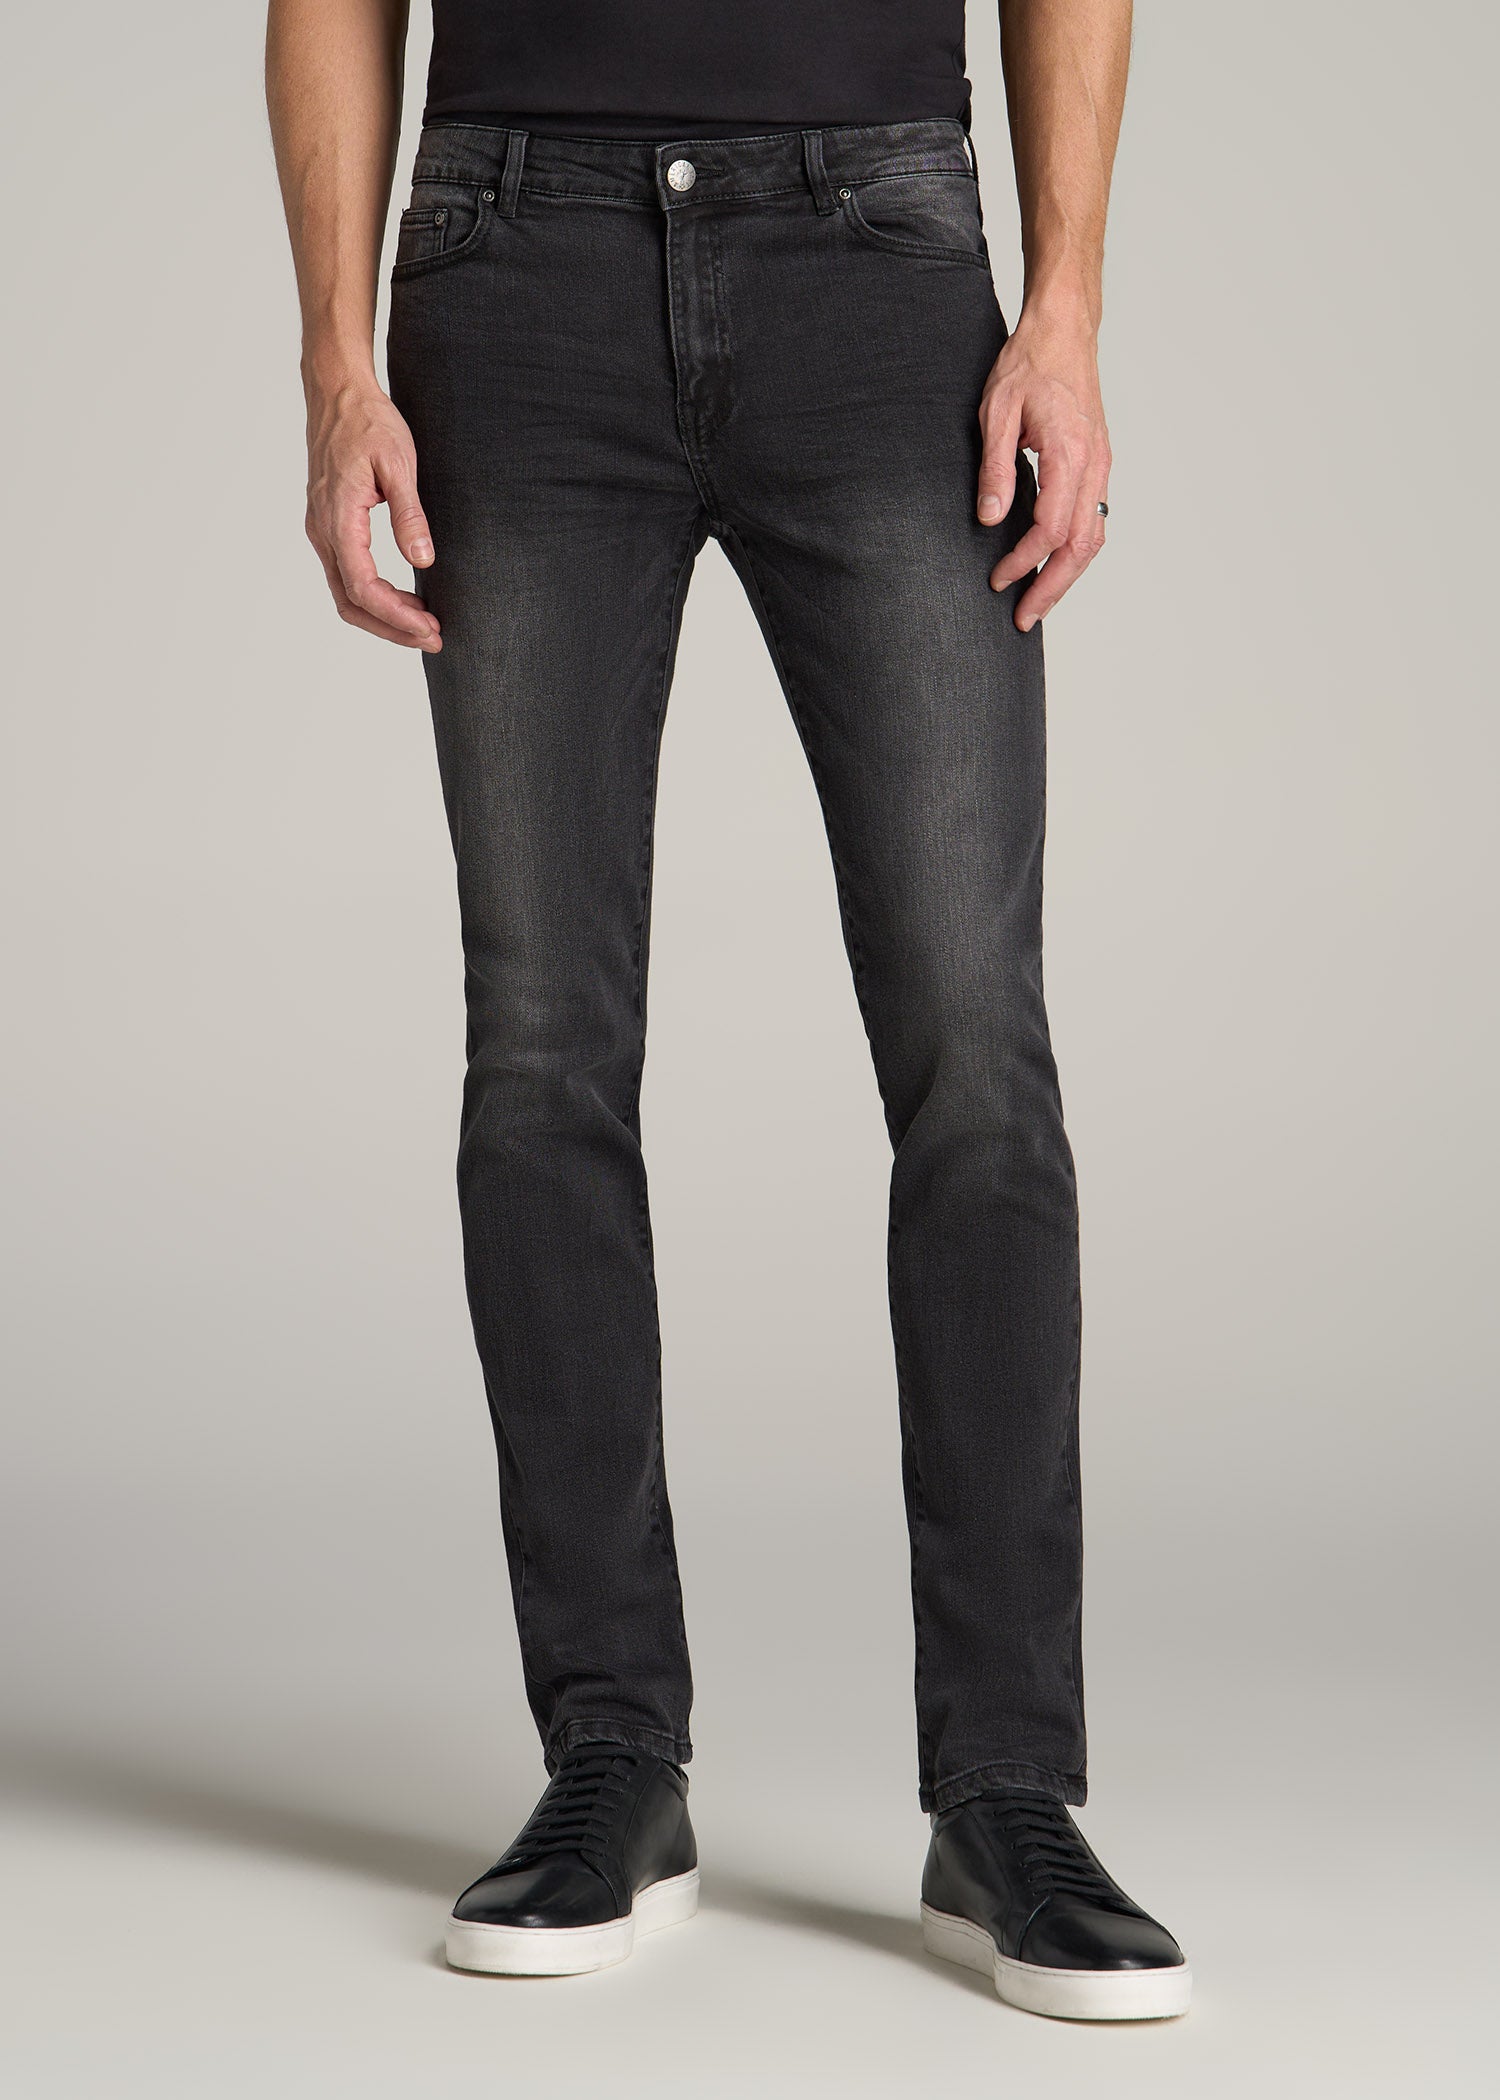 Dylan Slim Fit Jeans Dark Smoke For Tall Men | American Tall